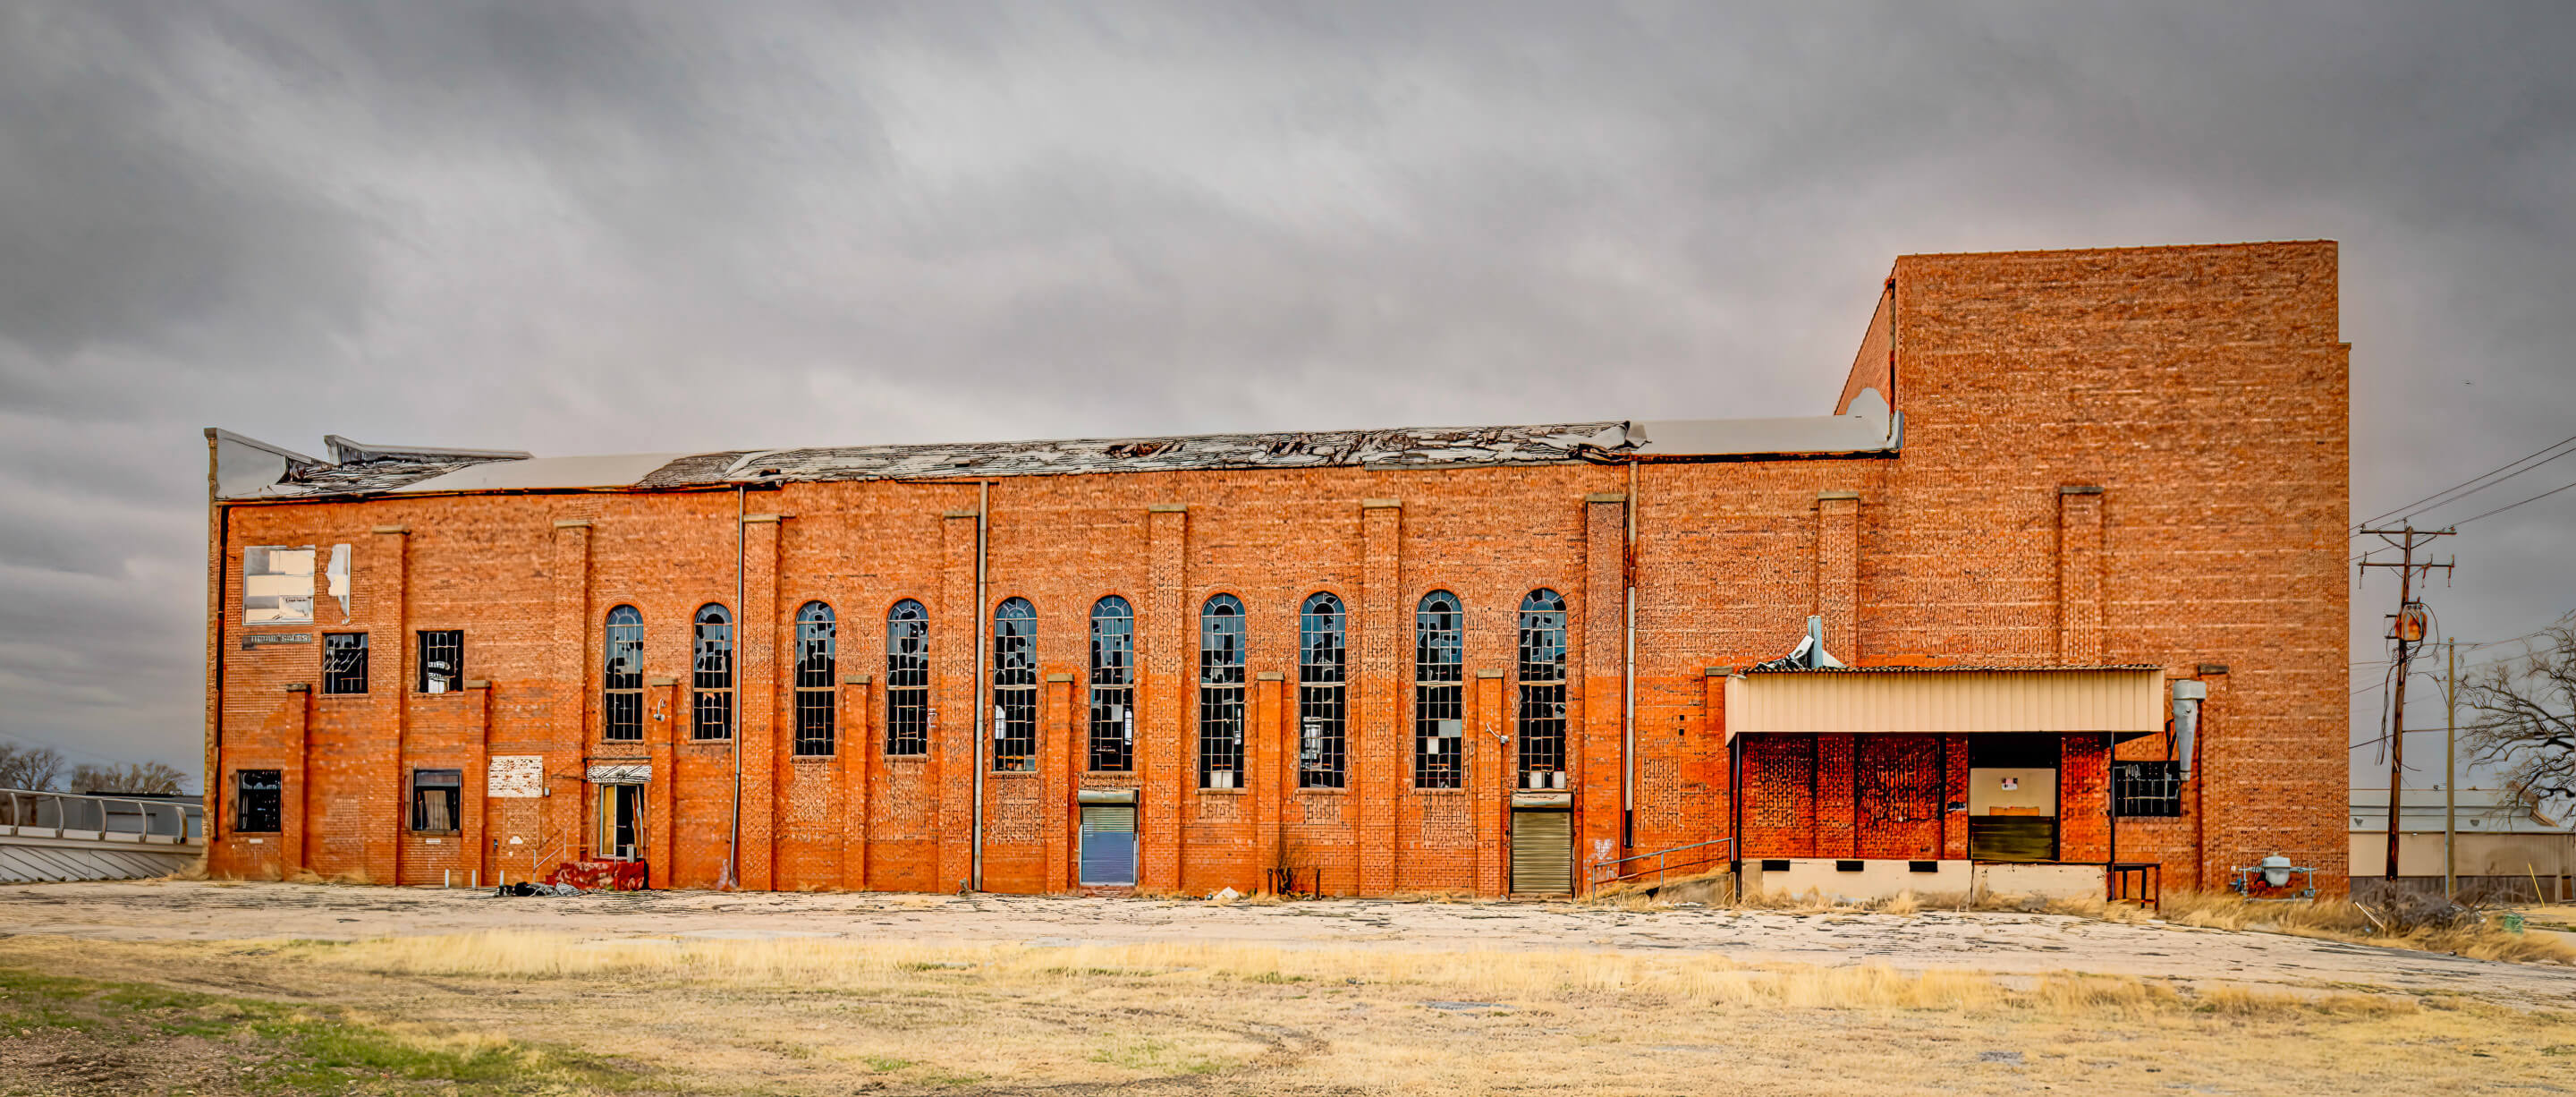 exterior view of a decaying brick warehouse building 